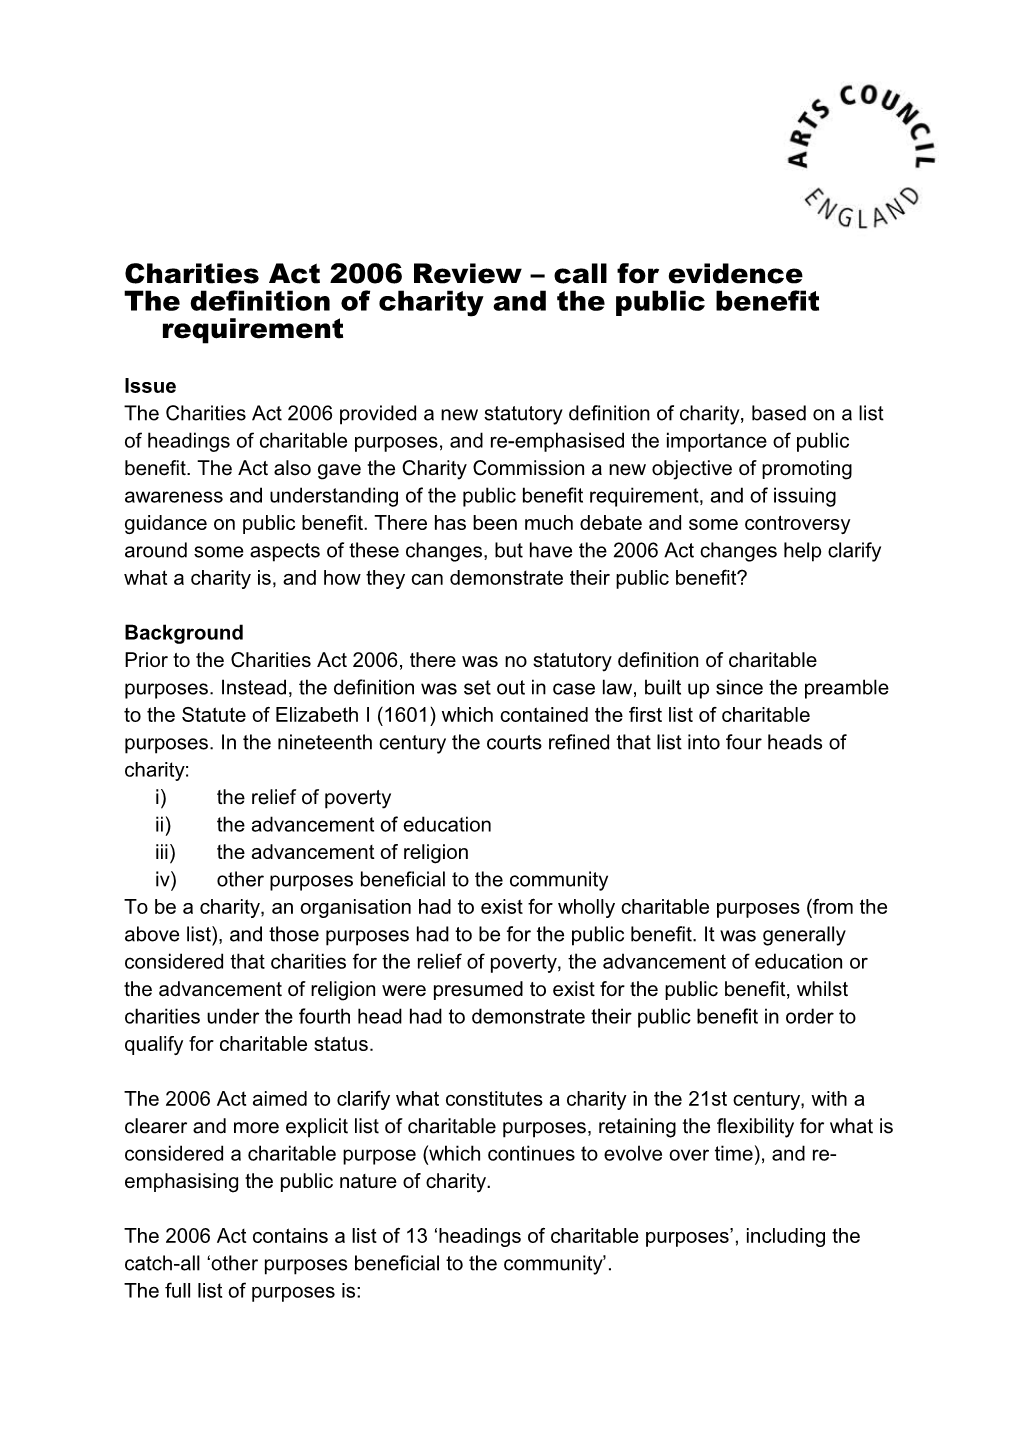 Charities Act 2006 Review Call for Evidence